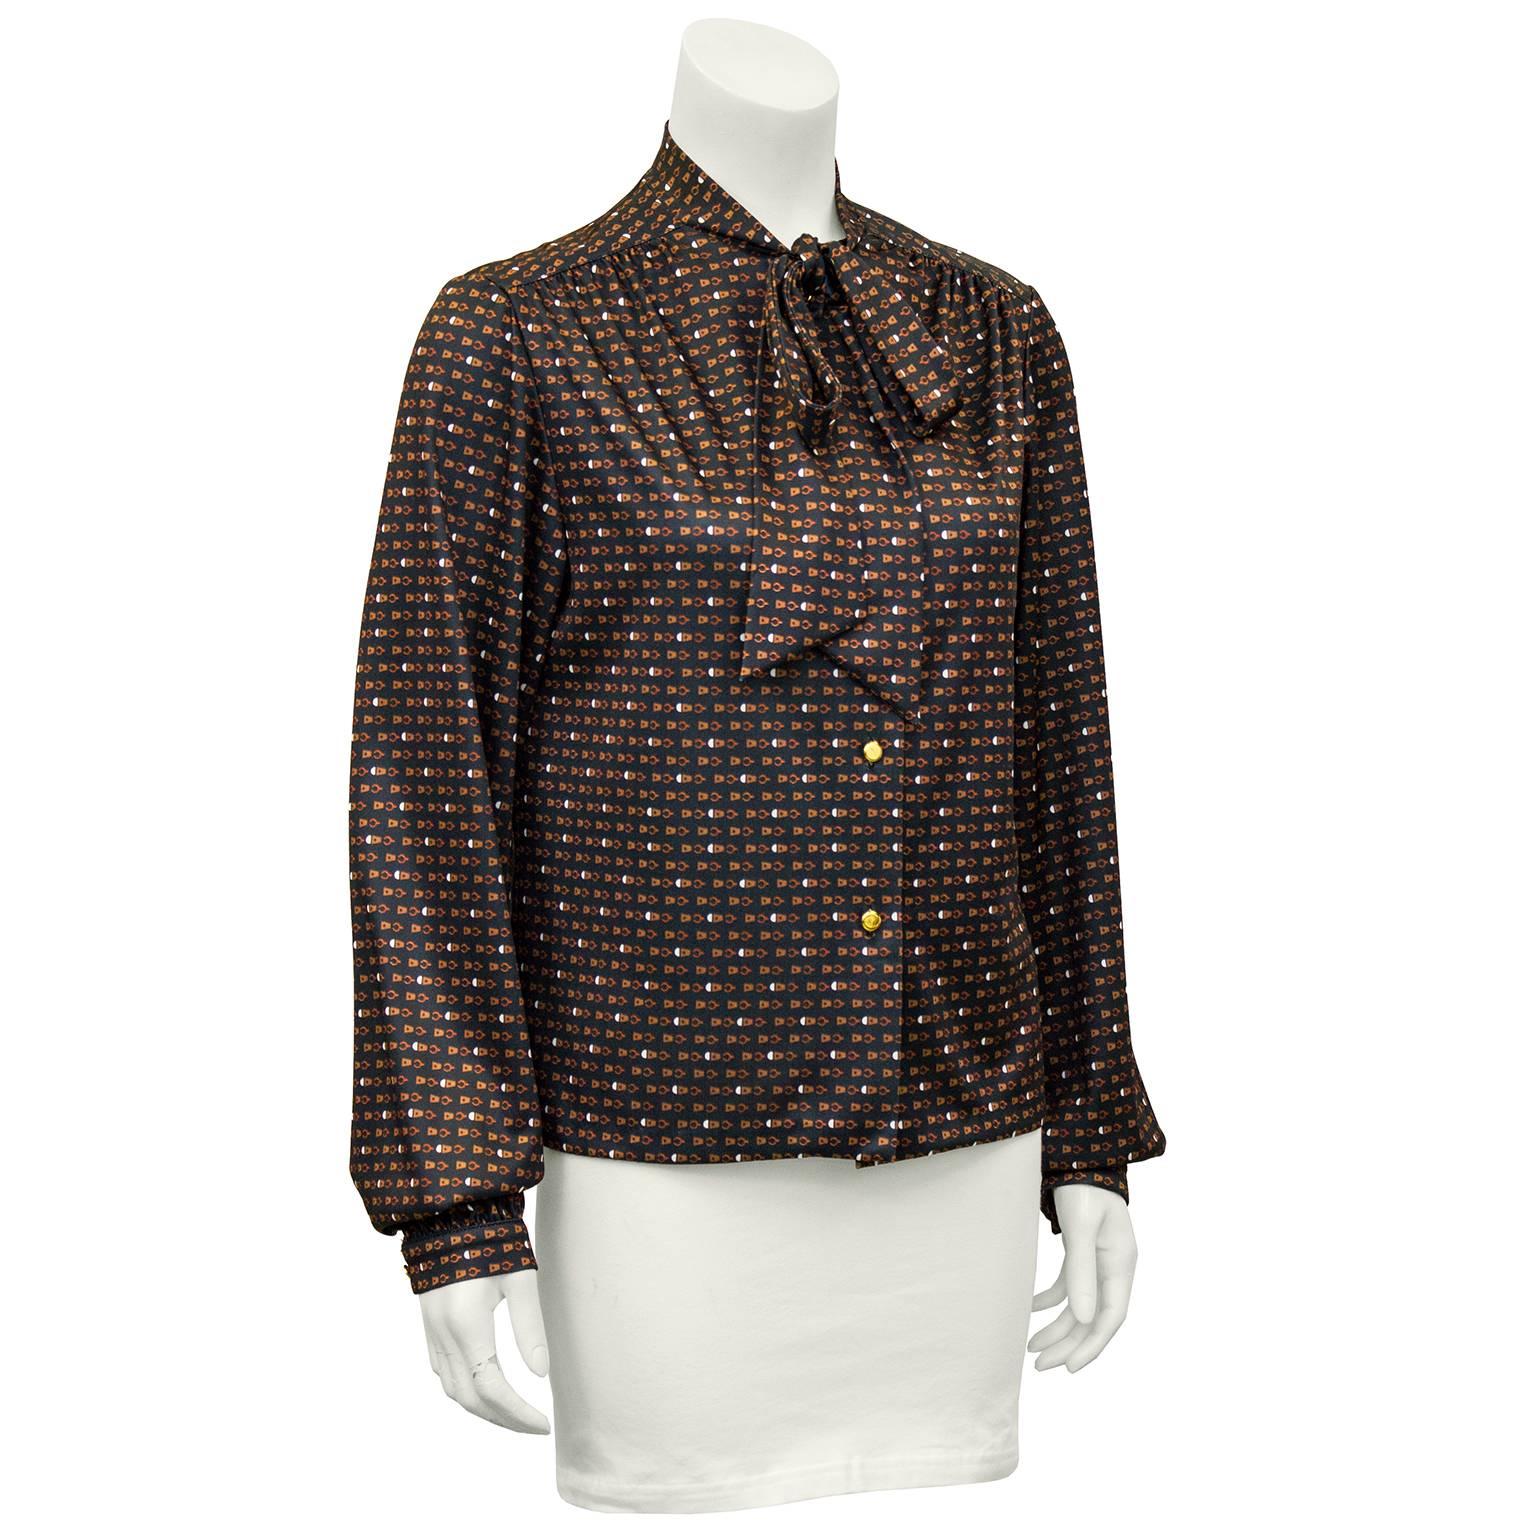 1970's polyester Pering blouse featuring a pussy bow detail at the neck. Black with a brown all over print. Gold buttons. Fits like a US size 6, excellent vintage condition. 

Sleeve 21" Shoulder 22" Bust 38" Waist 38" Hips